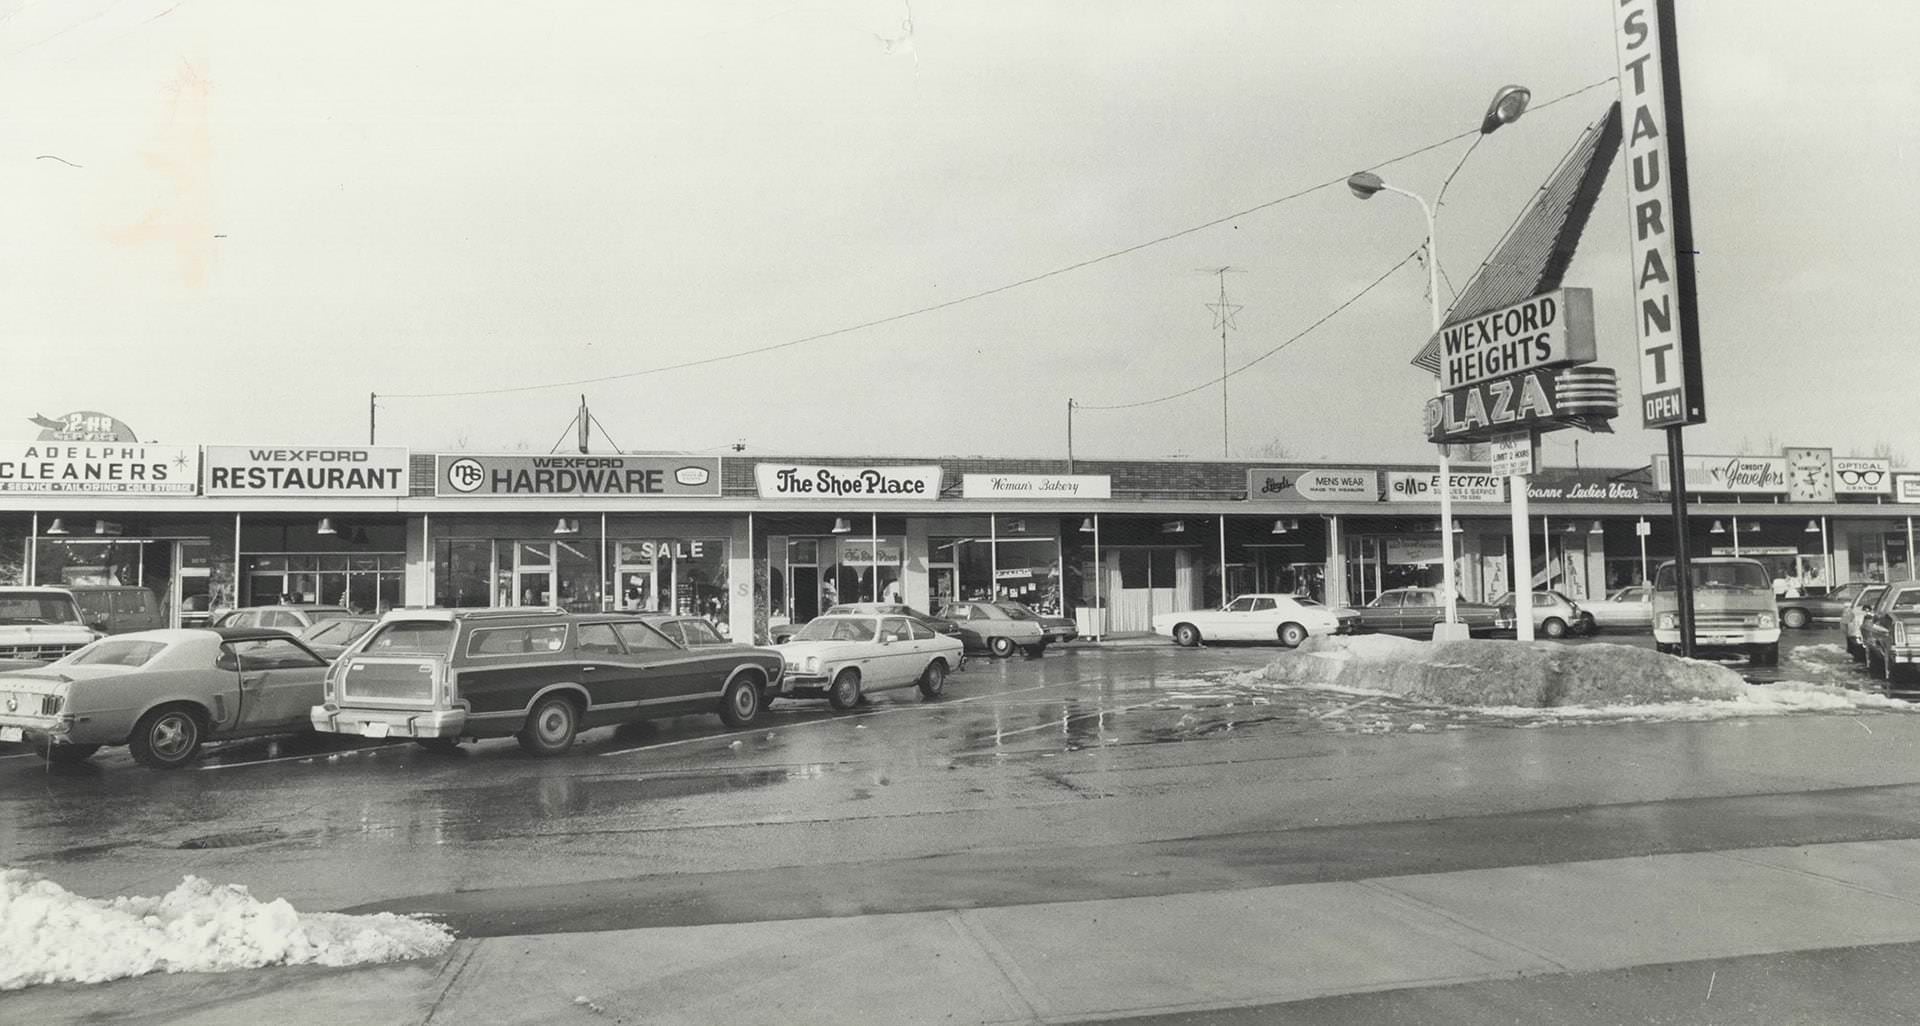 Wexford Heights Plaza with the recently closed Wexford Restaurant. Northeast corner of Warden & Lawrence, 1977